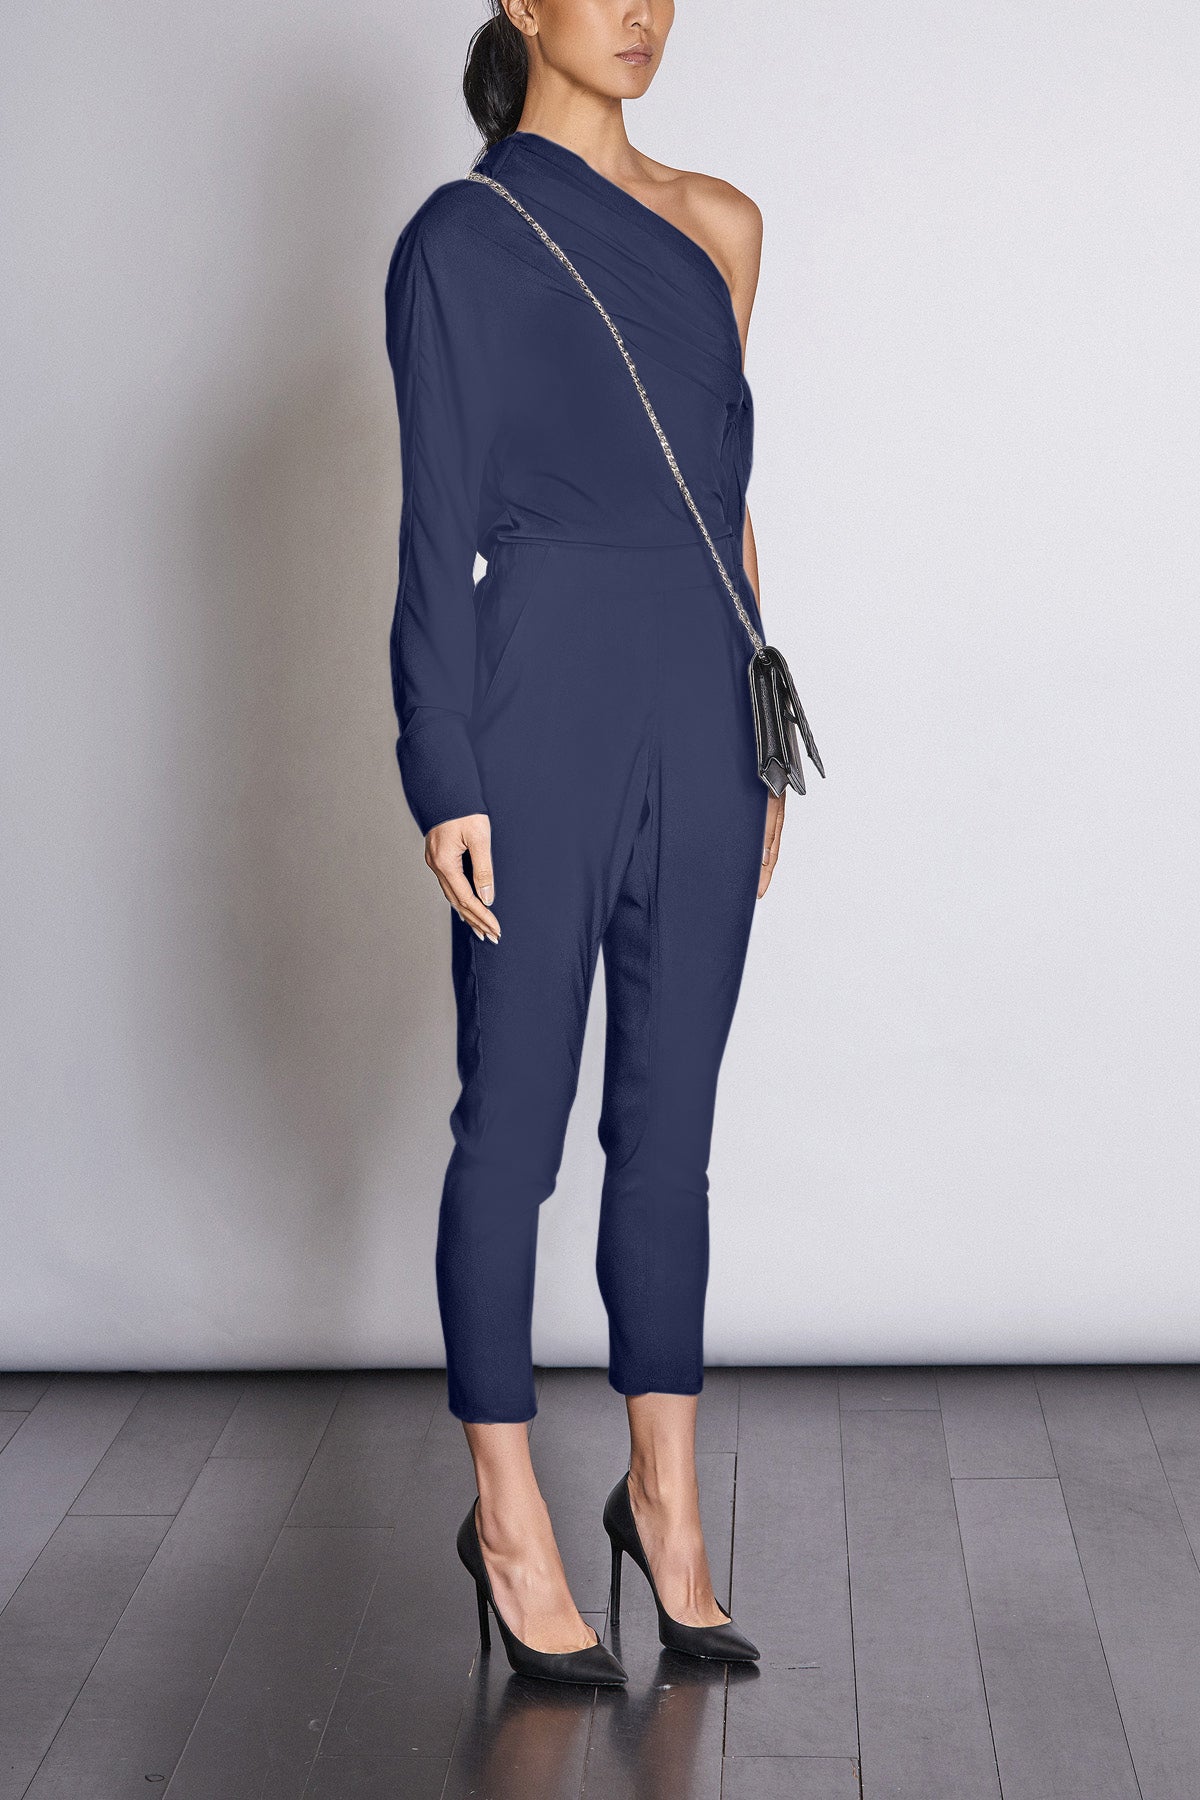 The Soft Harem Slouch Pant- Navy - MADE IN MELBOURNE - BEST SELLER - SALE